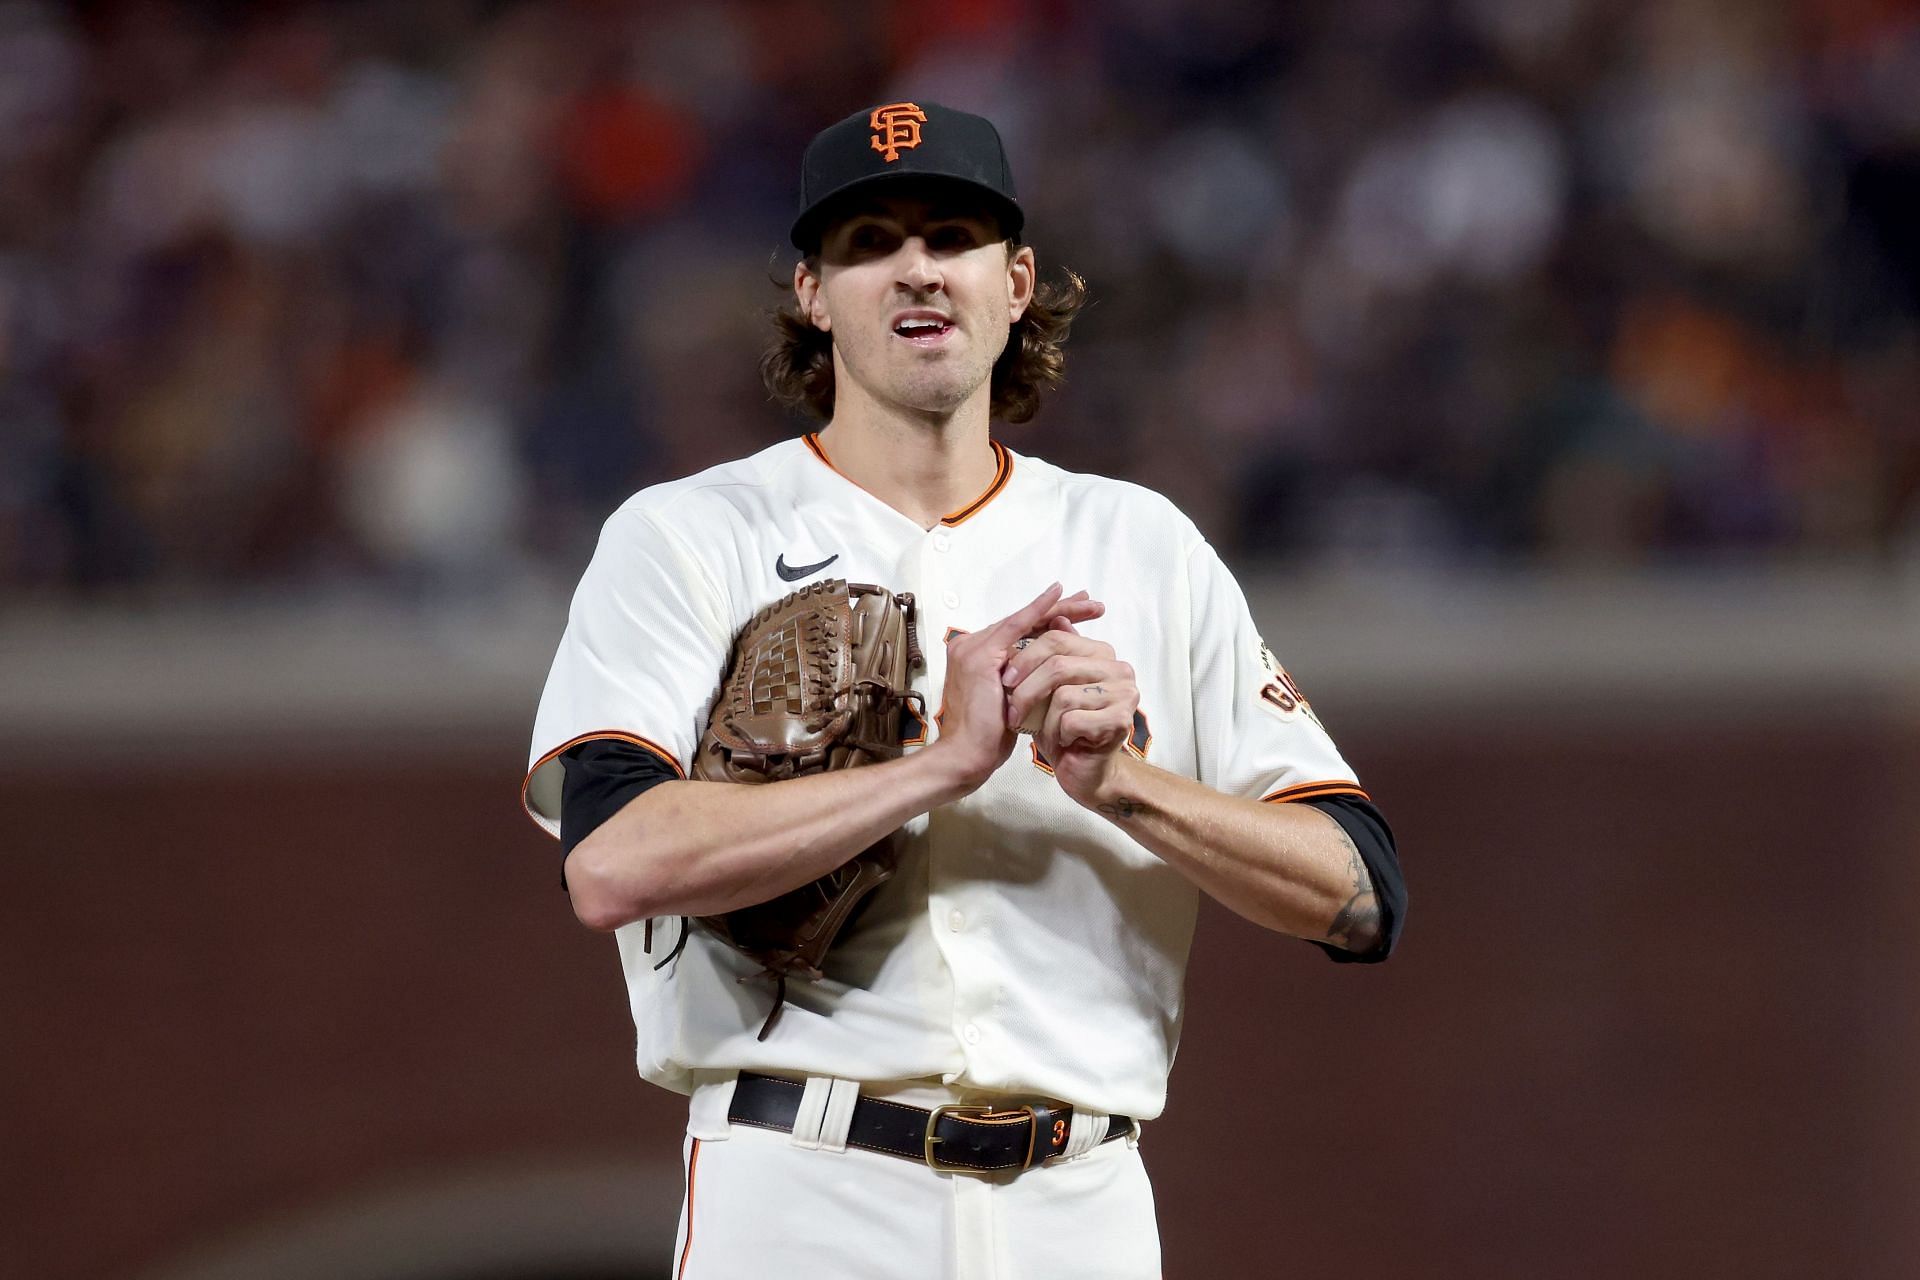 Kevin Gausman earned his lone All-Star Game nod in 2021 with the San Francisco Giants